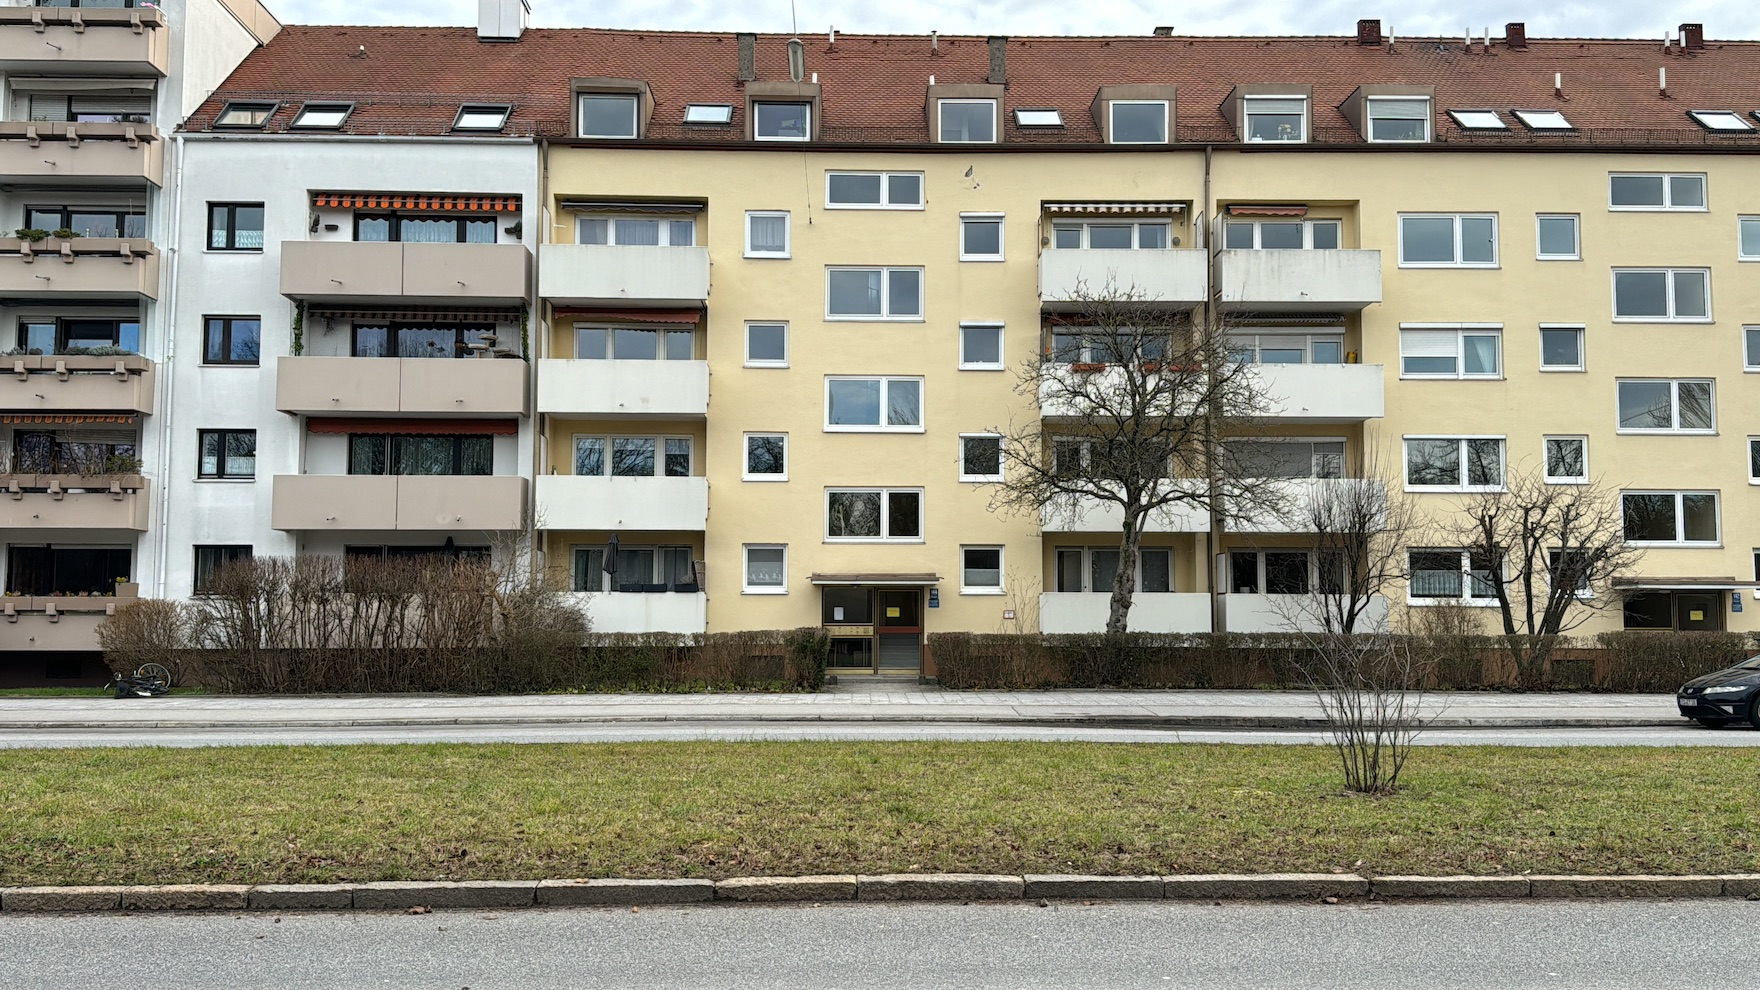 Rental property prices in Berlin and Munich have risen by over 20 percent in recent years./Natalie Carney/CGTN Europe 